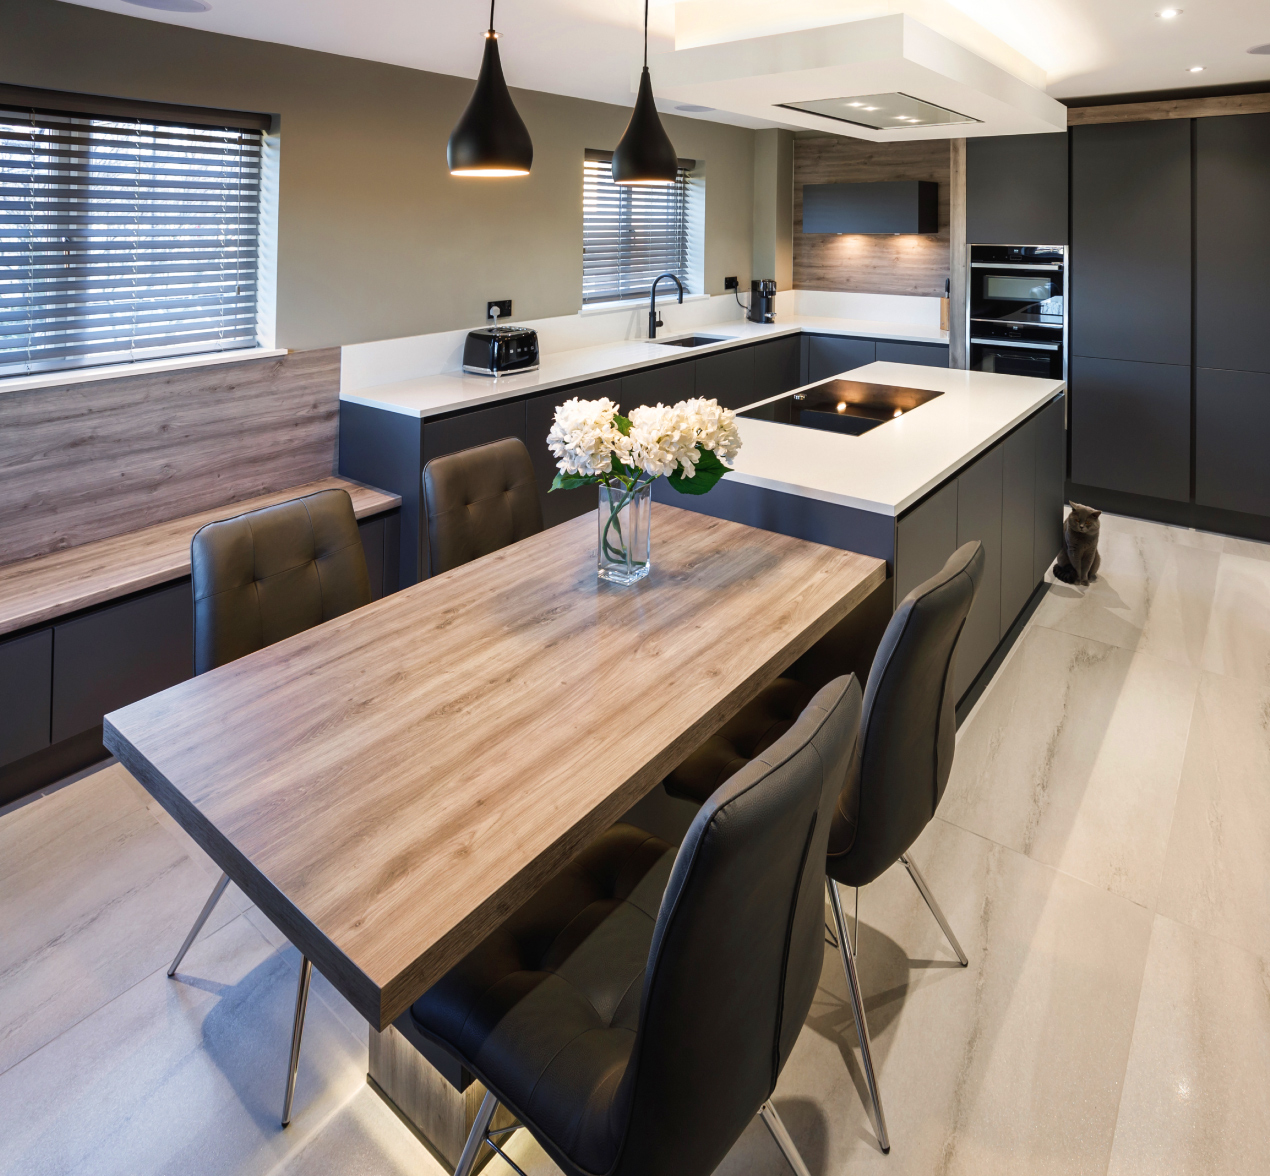 Led by Design: A Sleek, Luxurious, Contemporary Kitchen